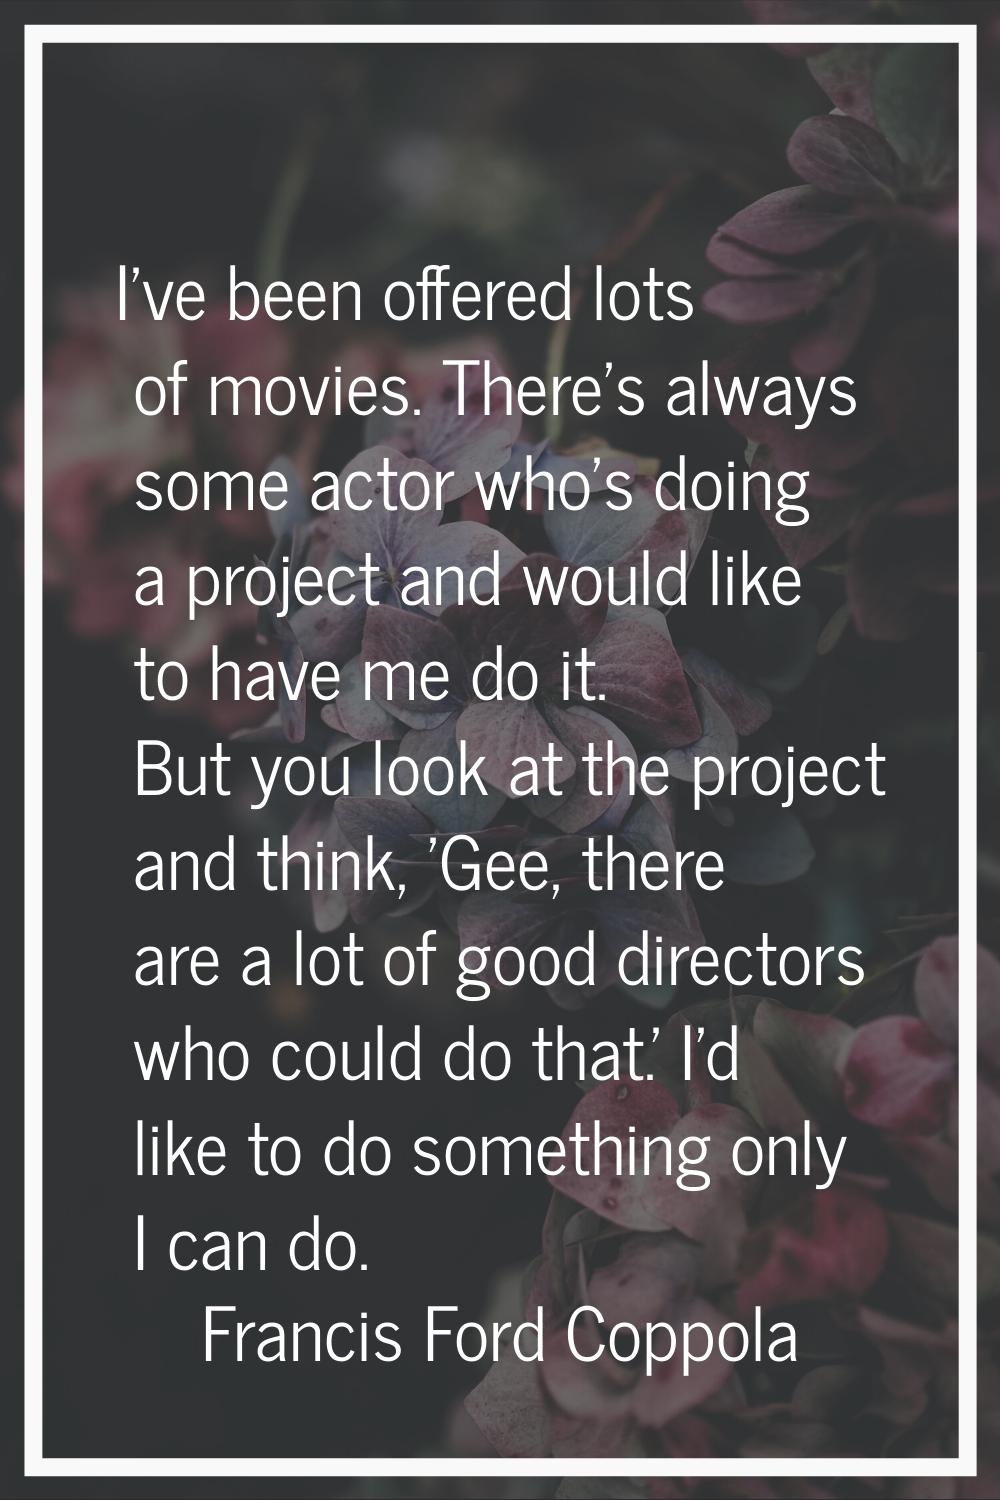 I've been offered lots of movies. There's always some actor who's doing a project and would like to